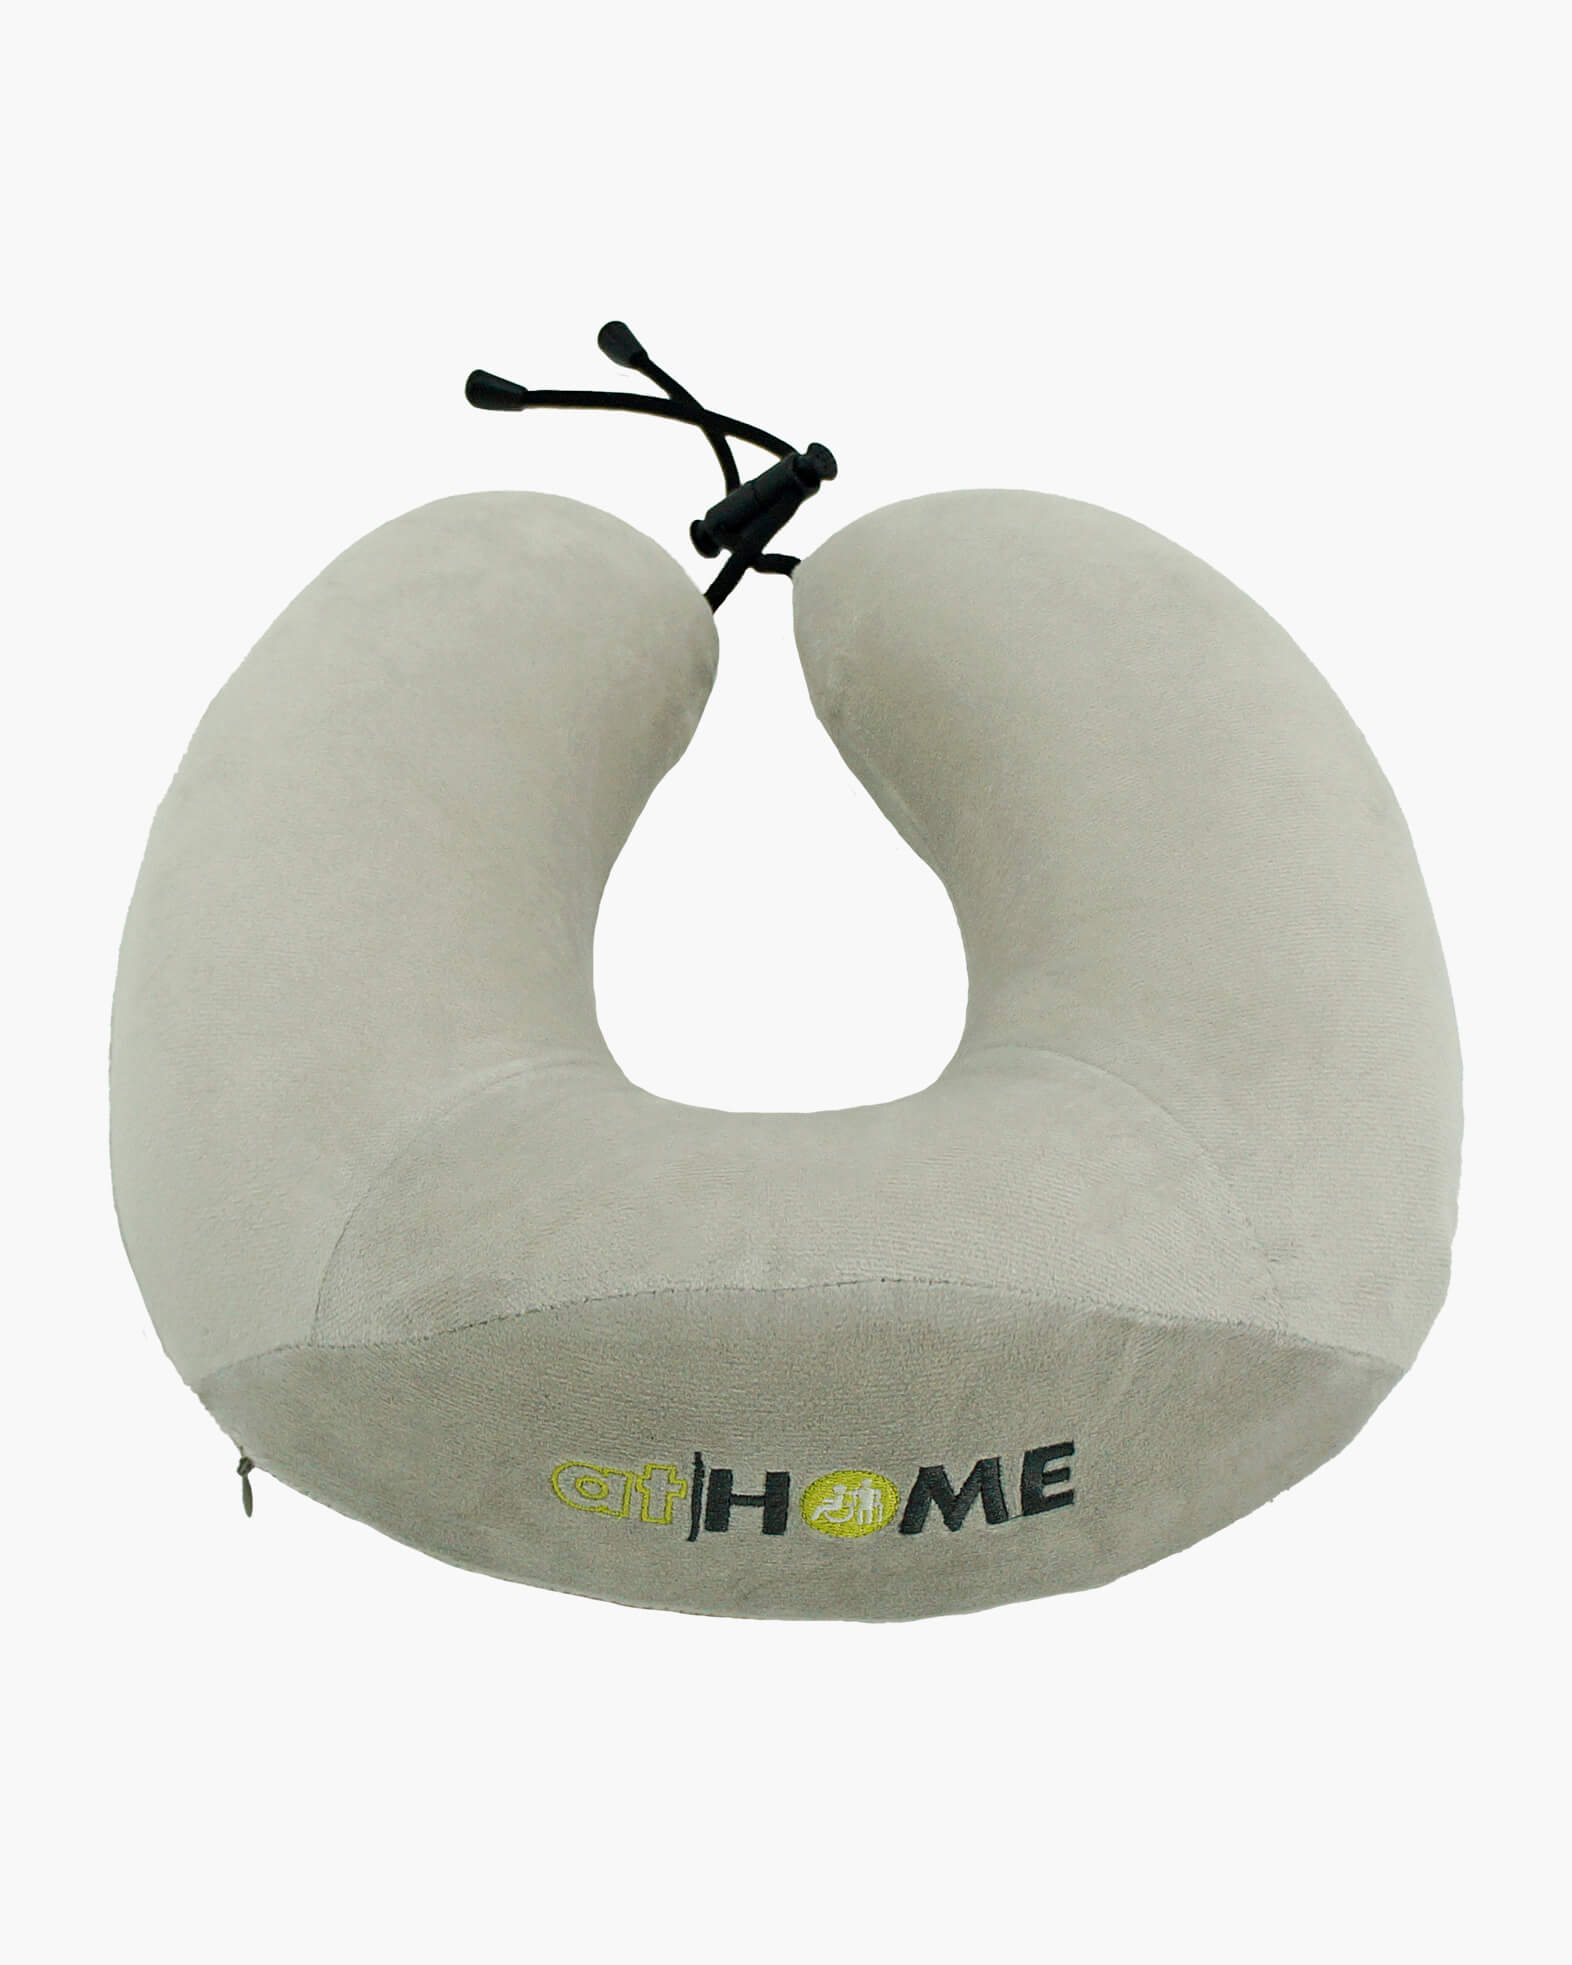 Ortho Care Neck Pillow - Premium Medical Comfort and Neck Support